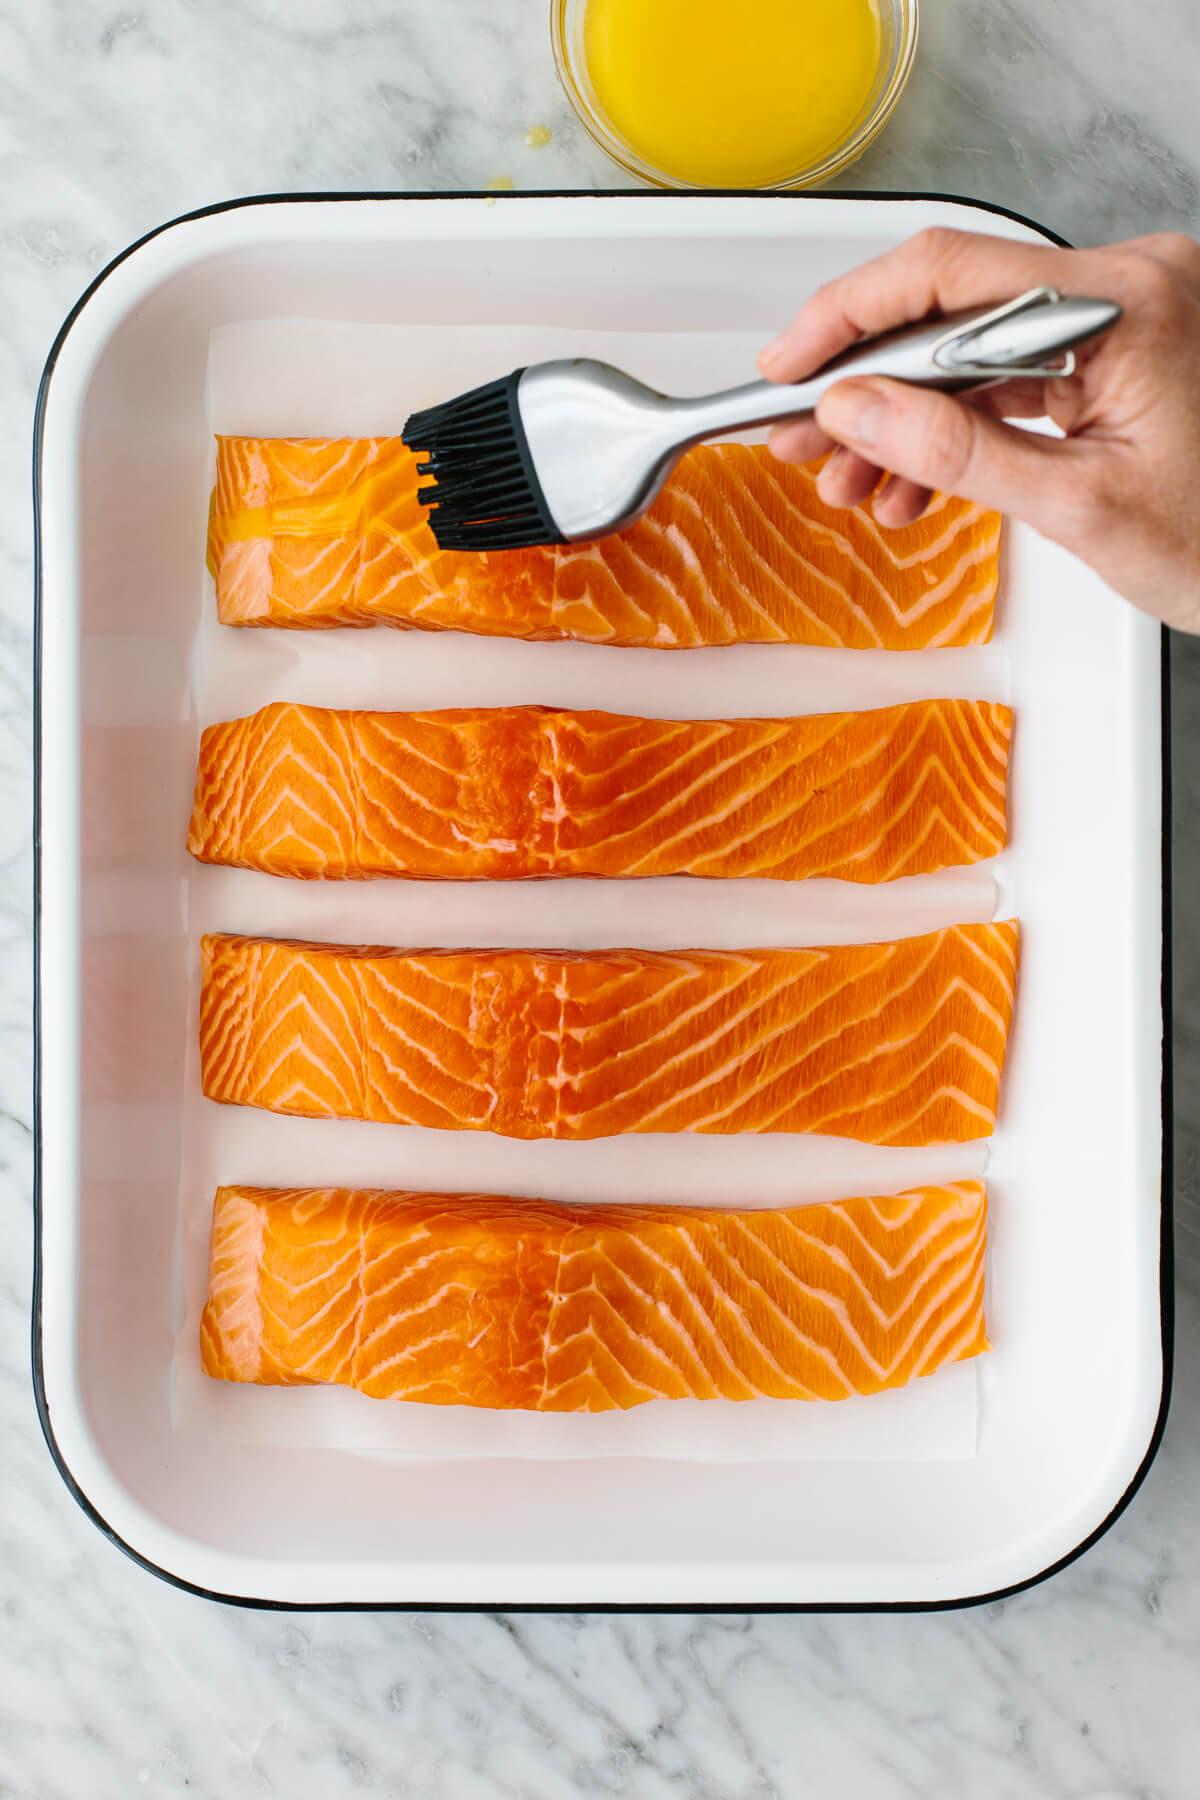 Brushing butter on baked salmon in a pan.